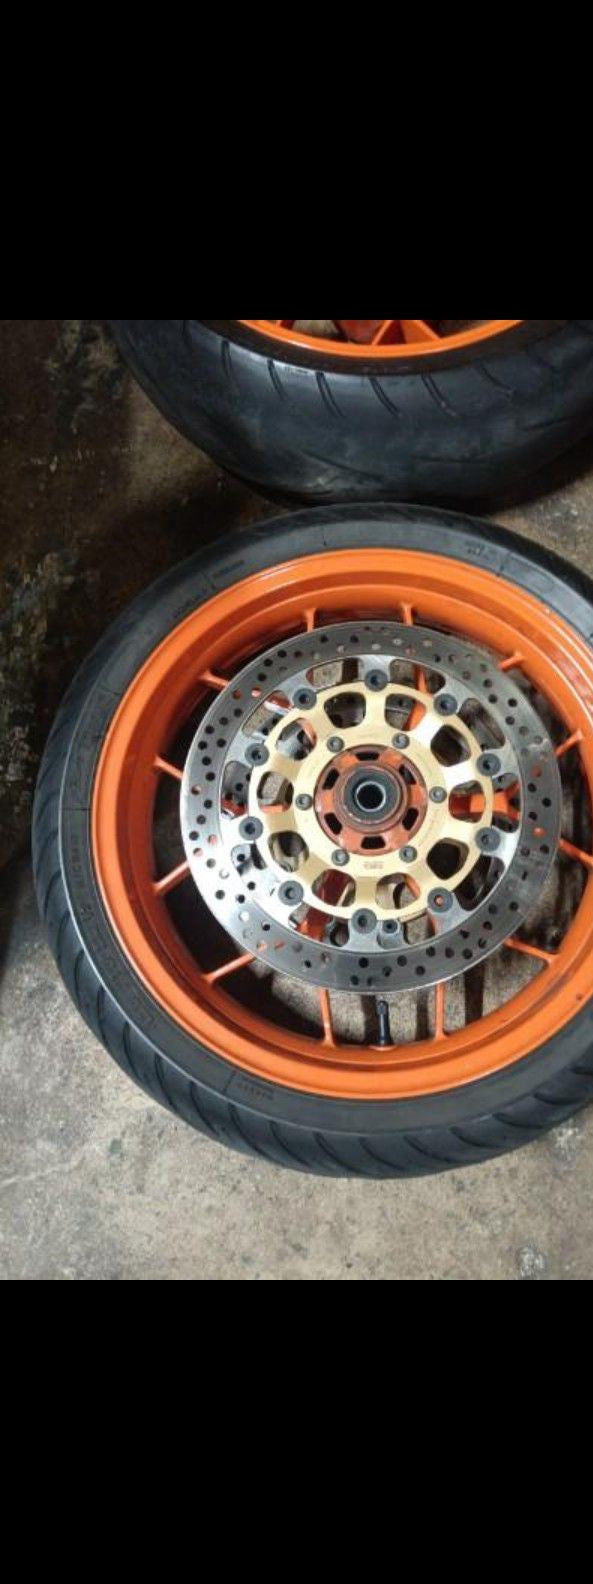 2007 Up Honda CBR600RR 600RR Repsol Honeycomb Wheels - Price Is With Your Wheels As Exchange